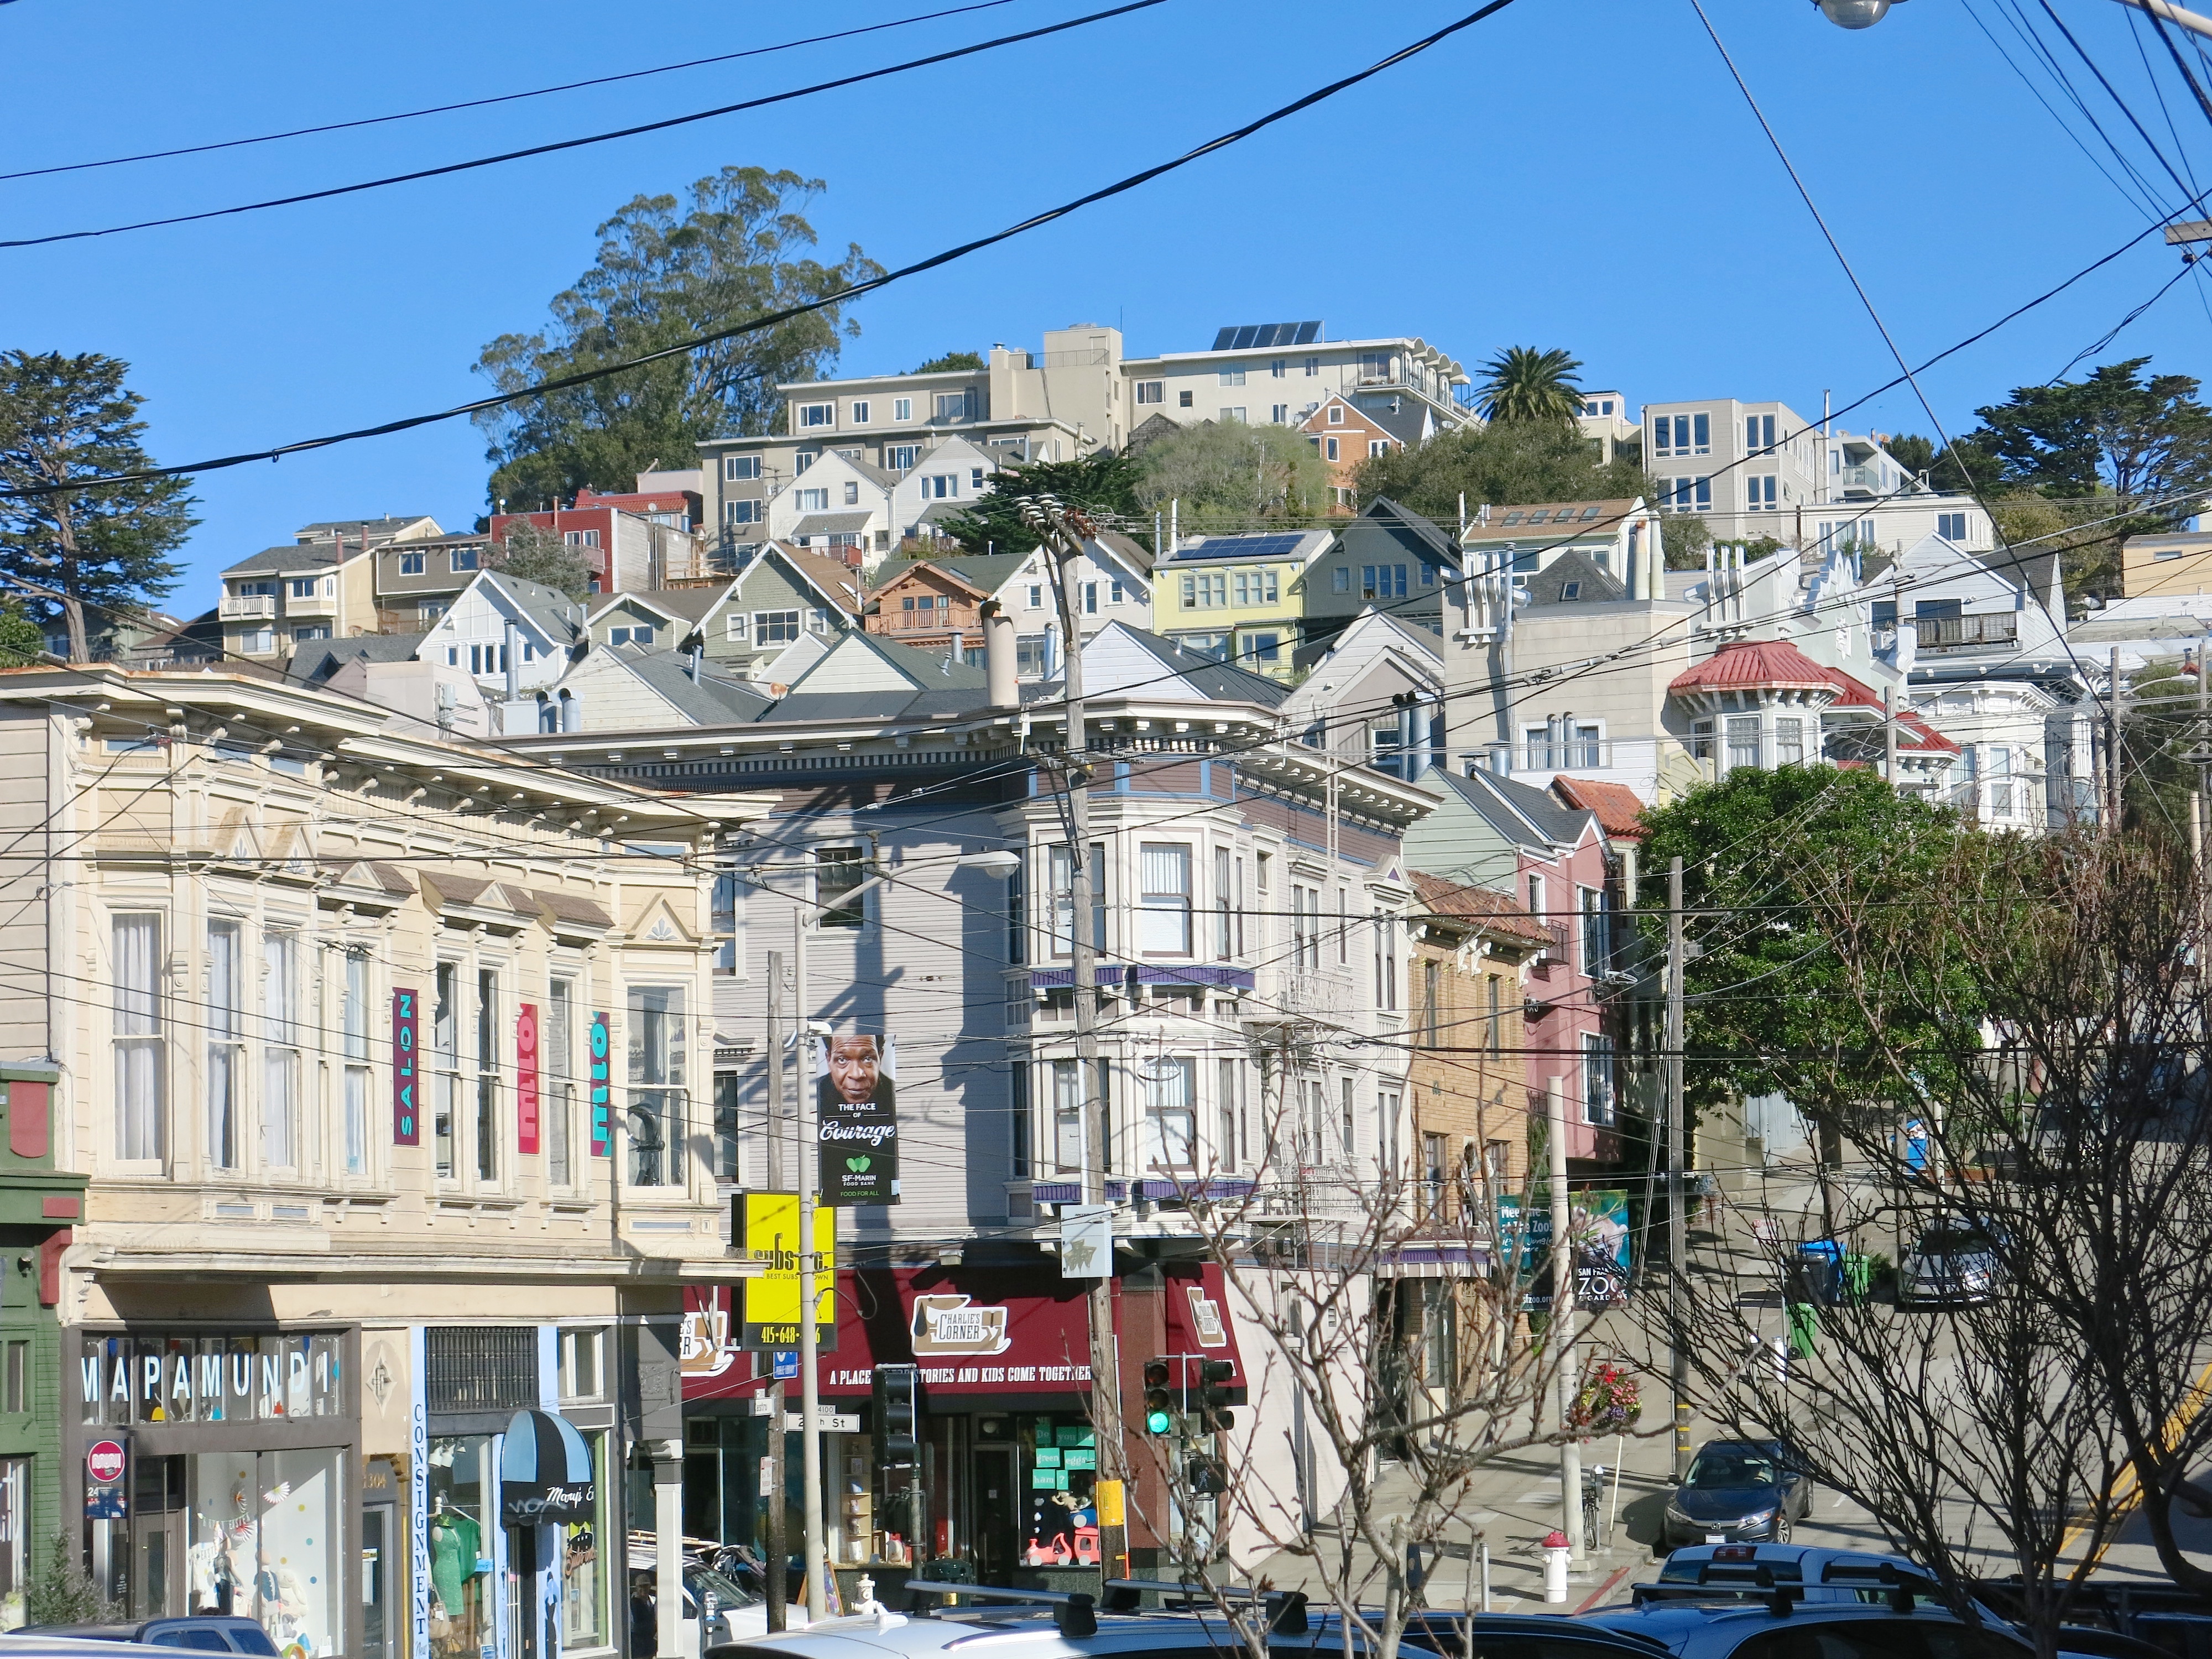 Noe Valley and the colorful homes in it